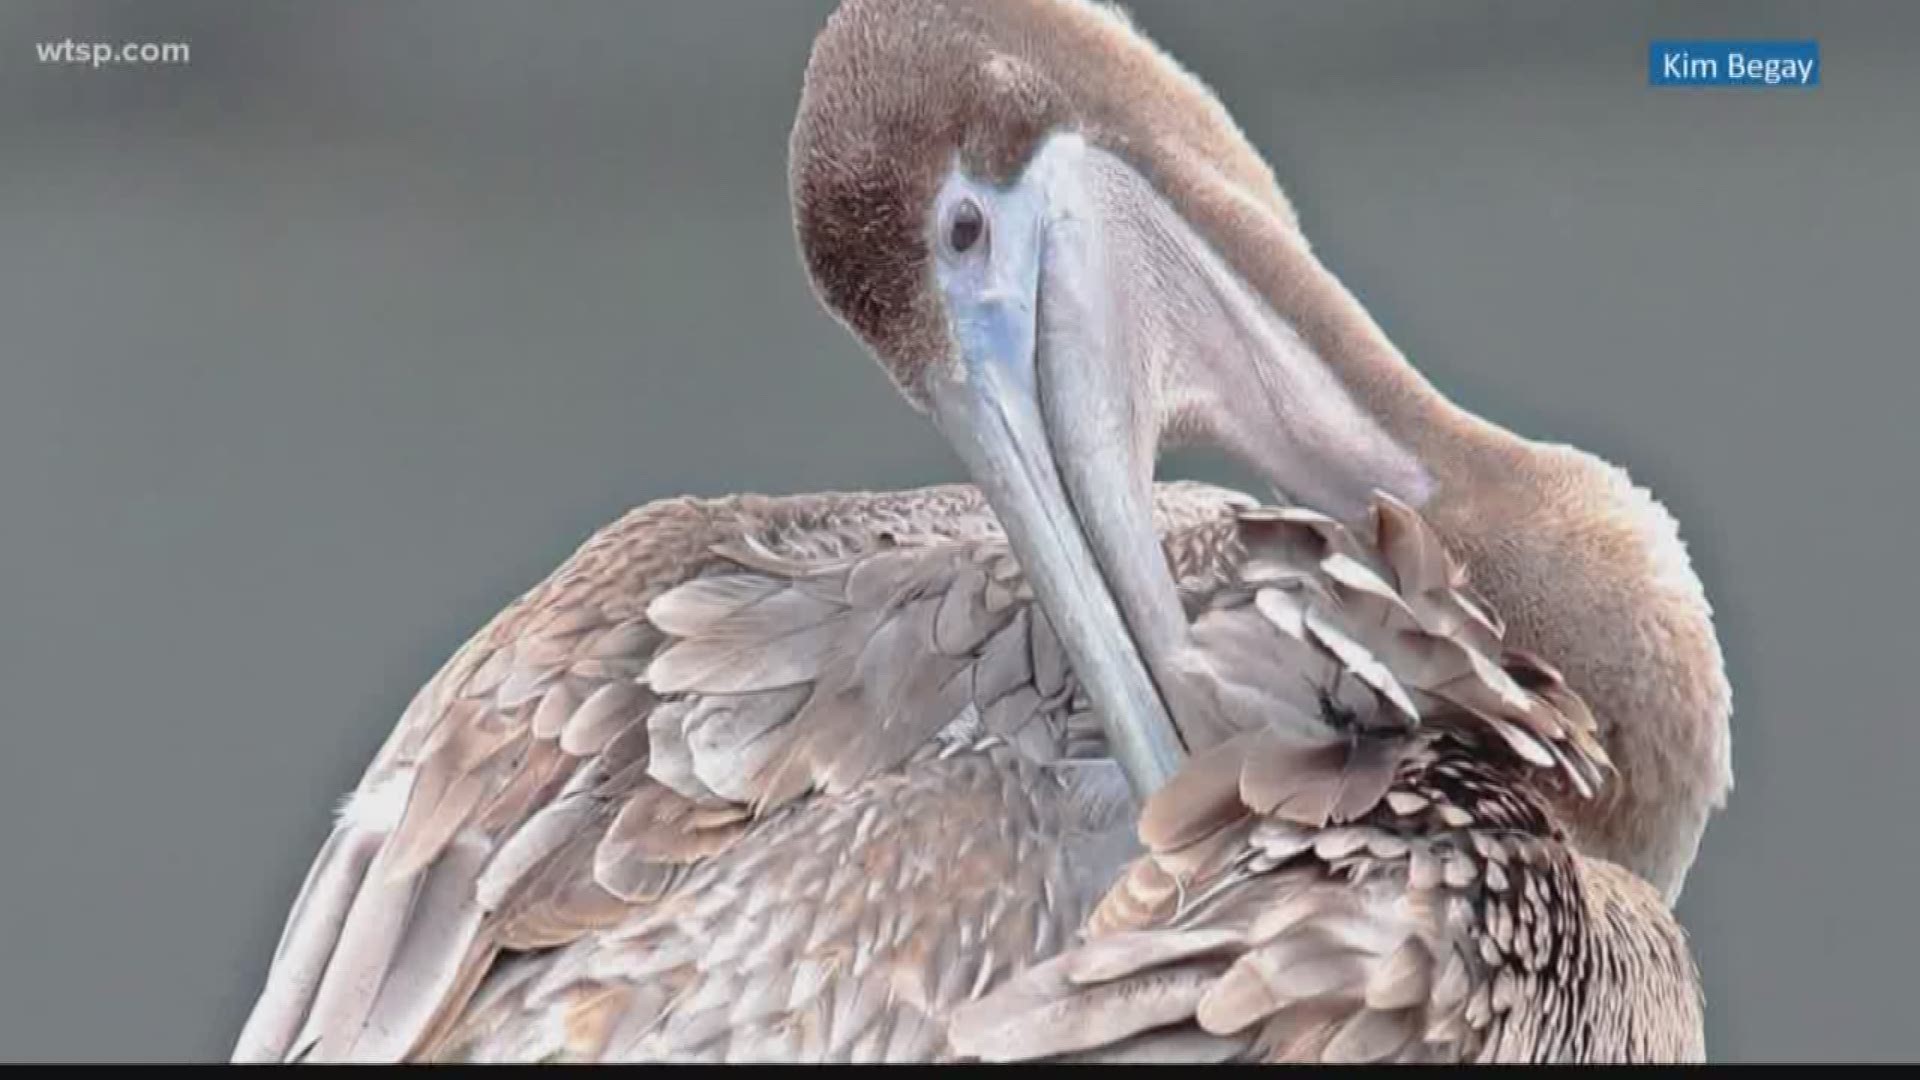 Animal advocates hoping to save brown pelicans in Tampa Bay are spreading the word on how they can be caught up in fishermen's hooks.